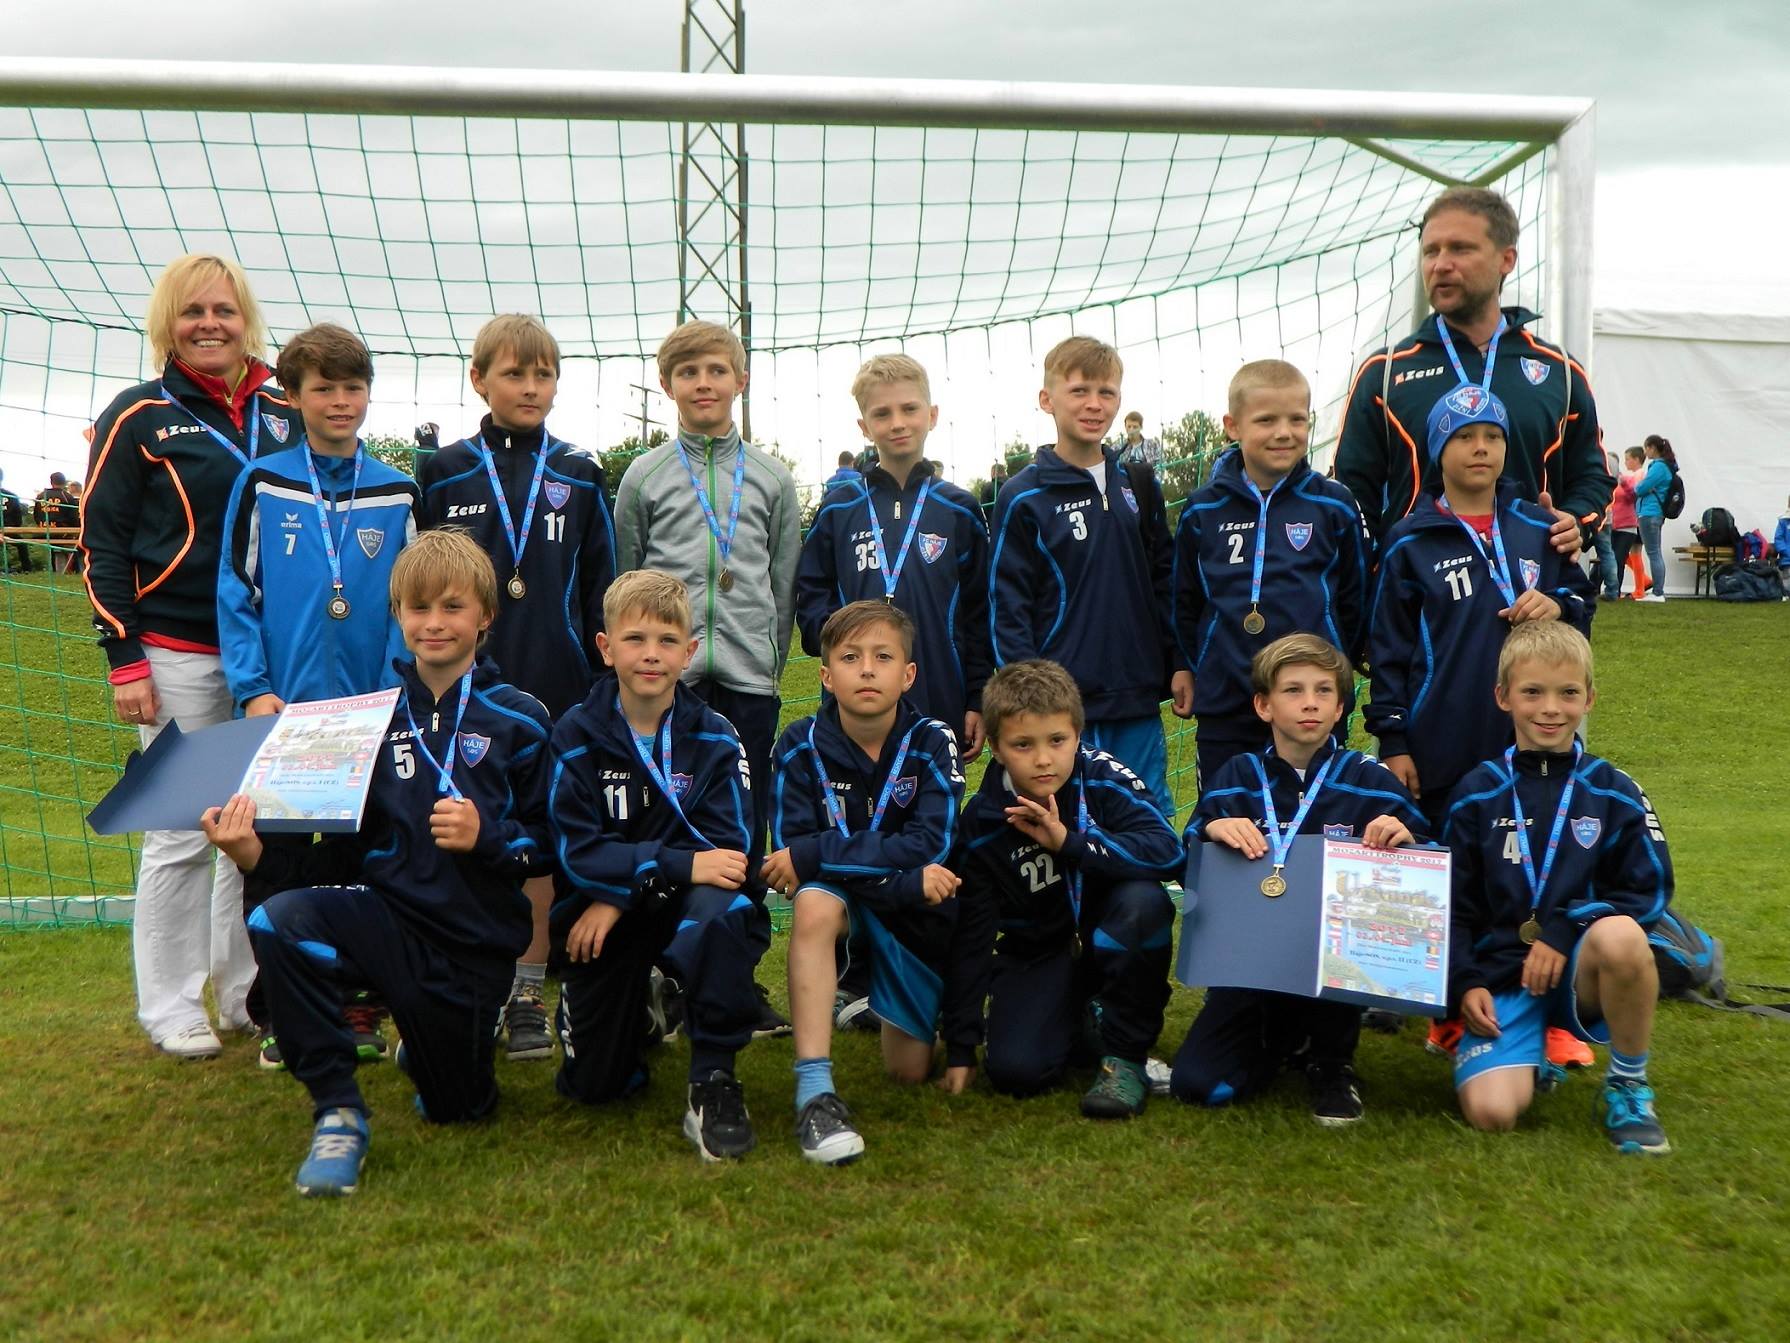 Ronk 2007: Mozart cup 2017